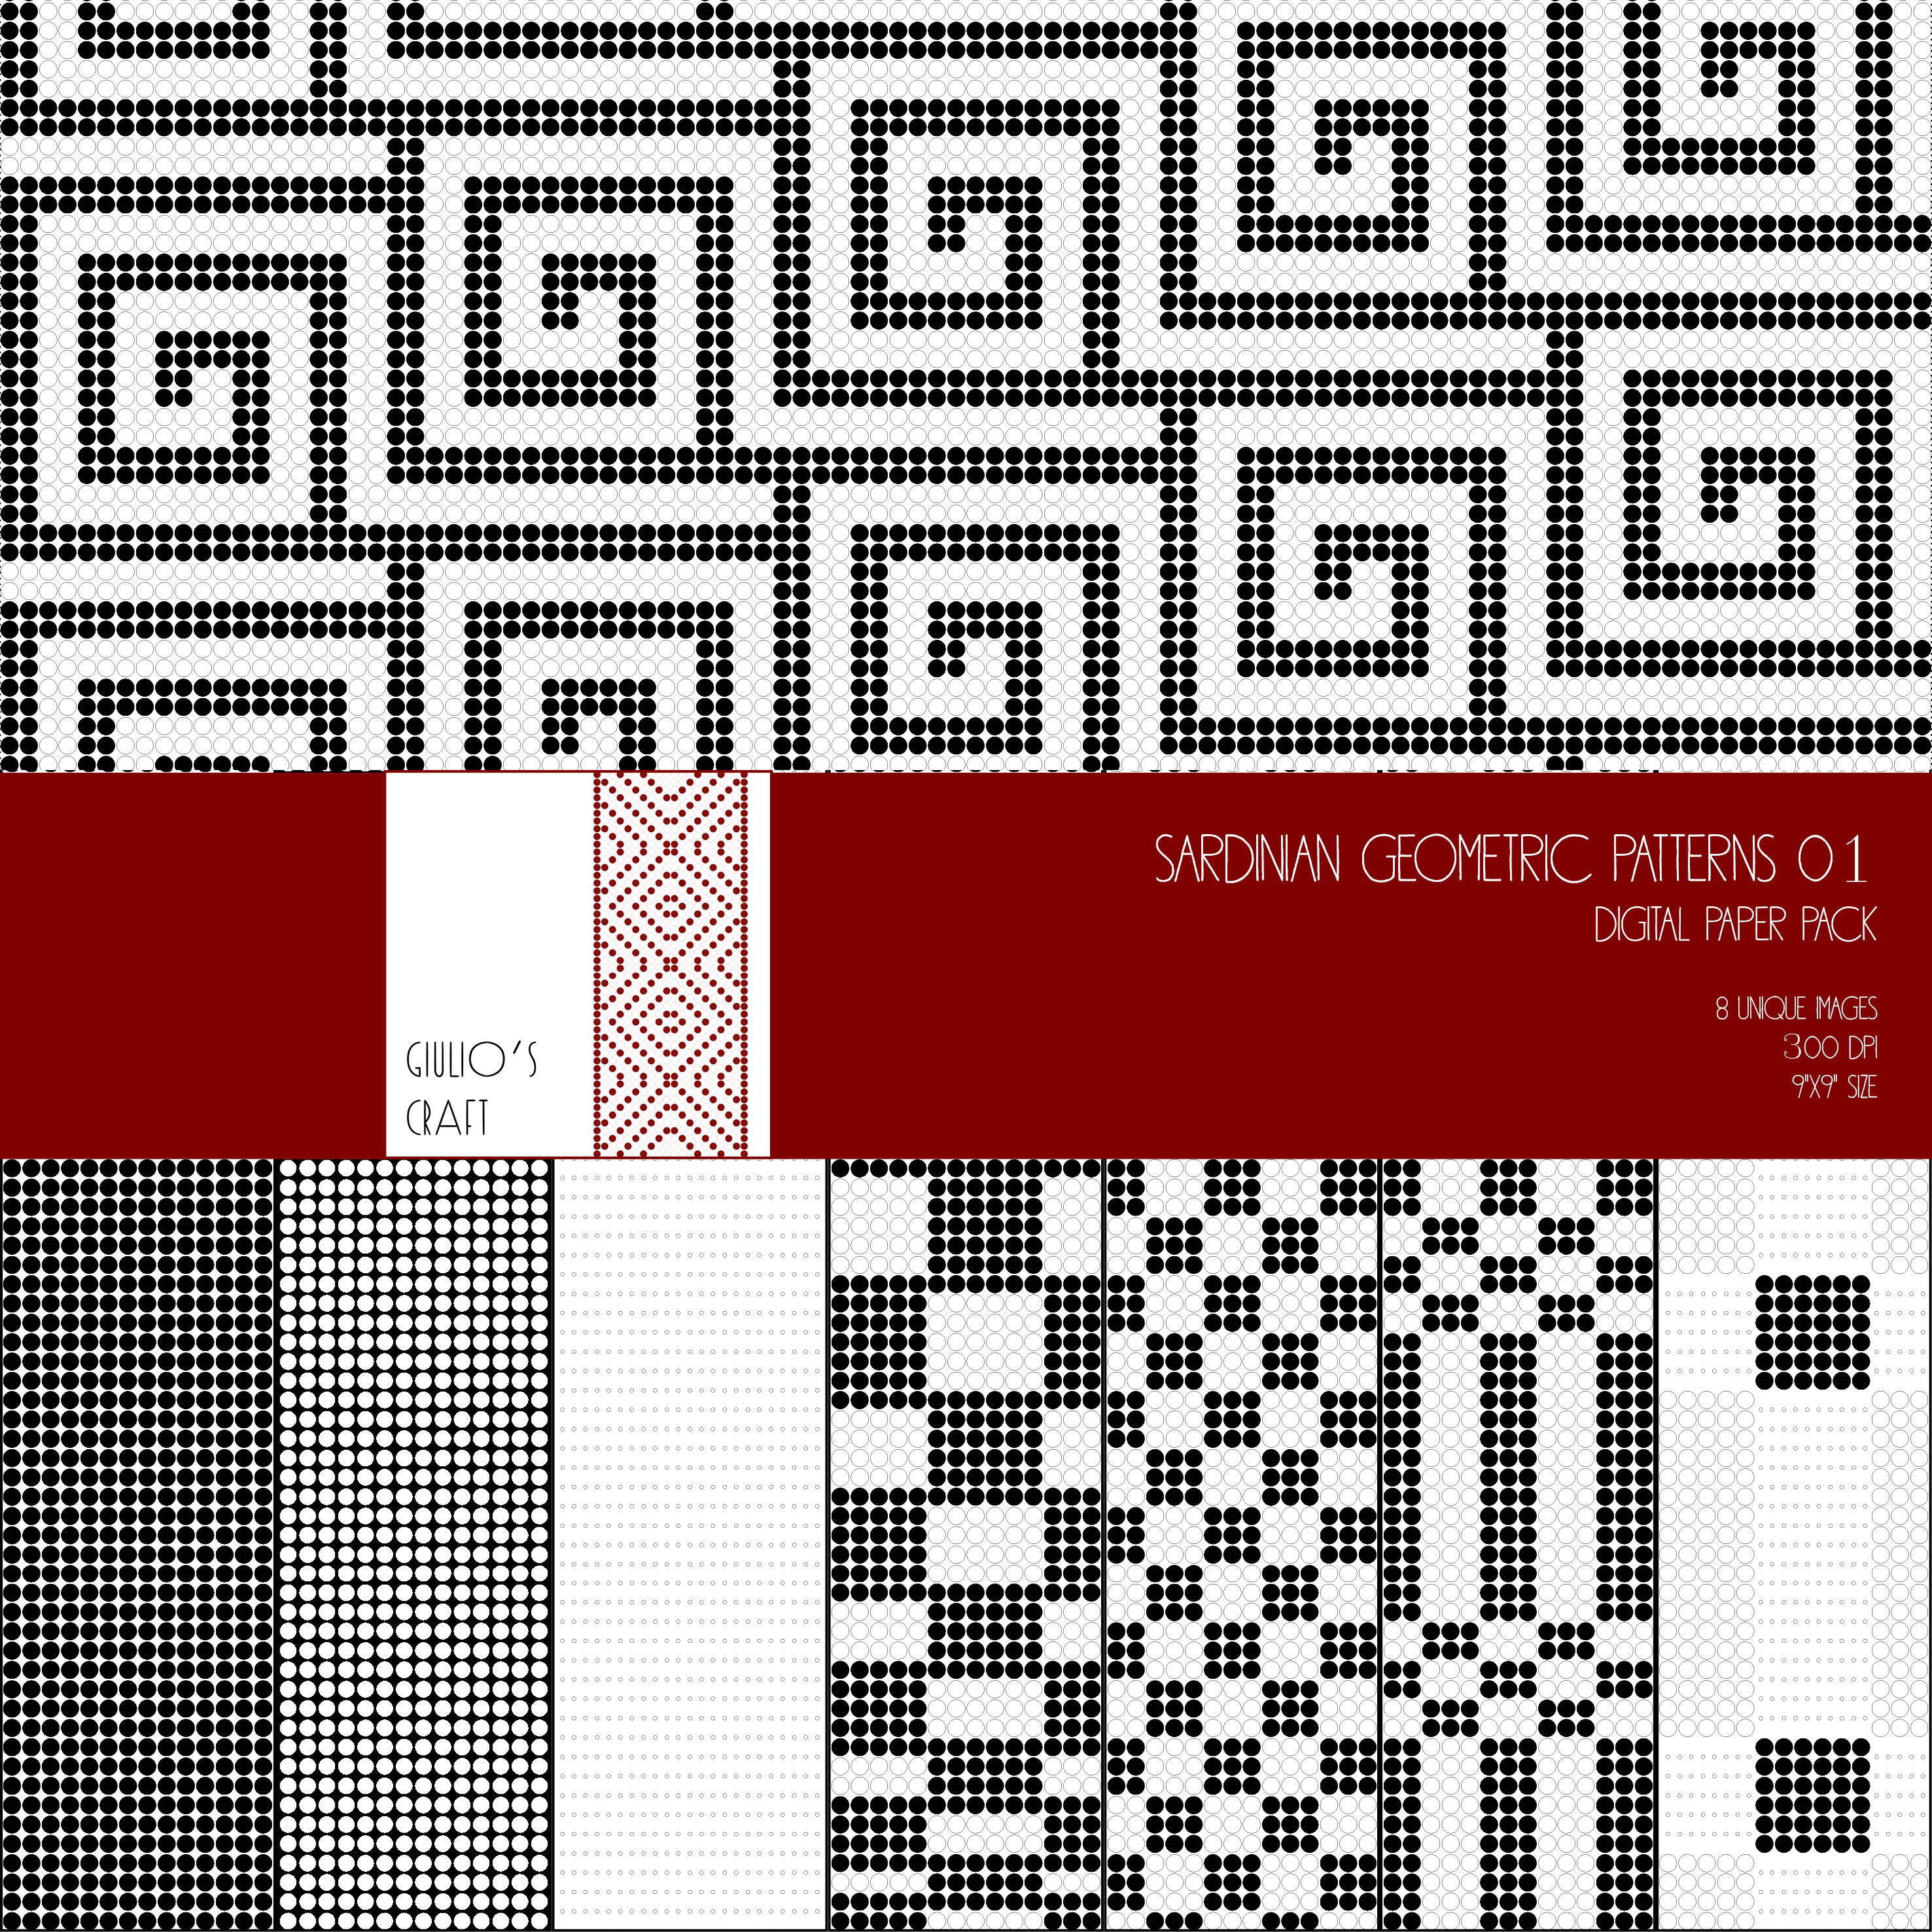 72 Black and White Digital Paper Pack. Patterns, Scrapbooking